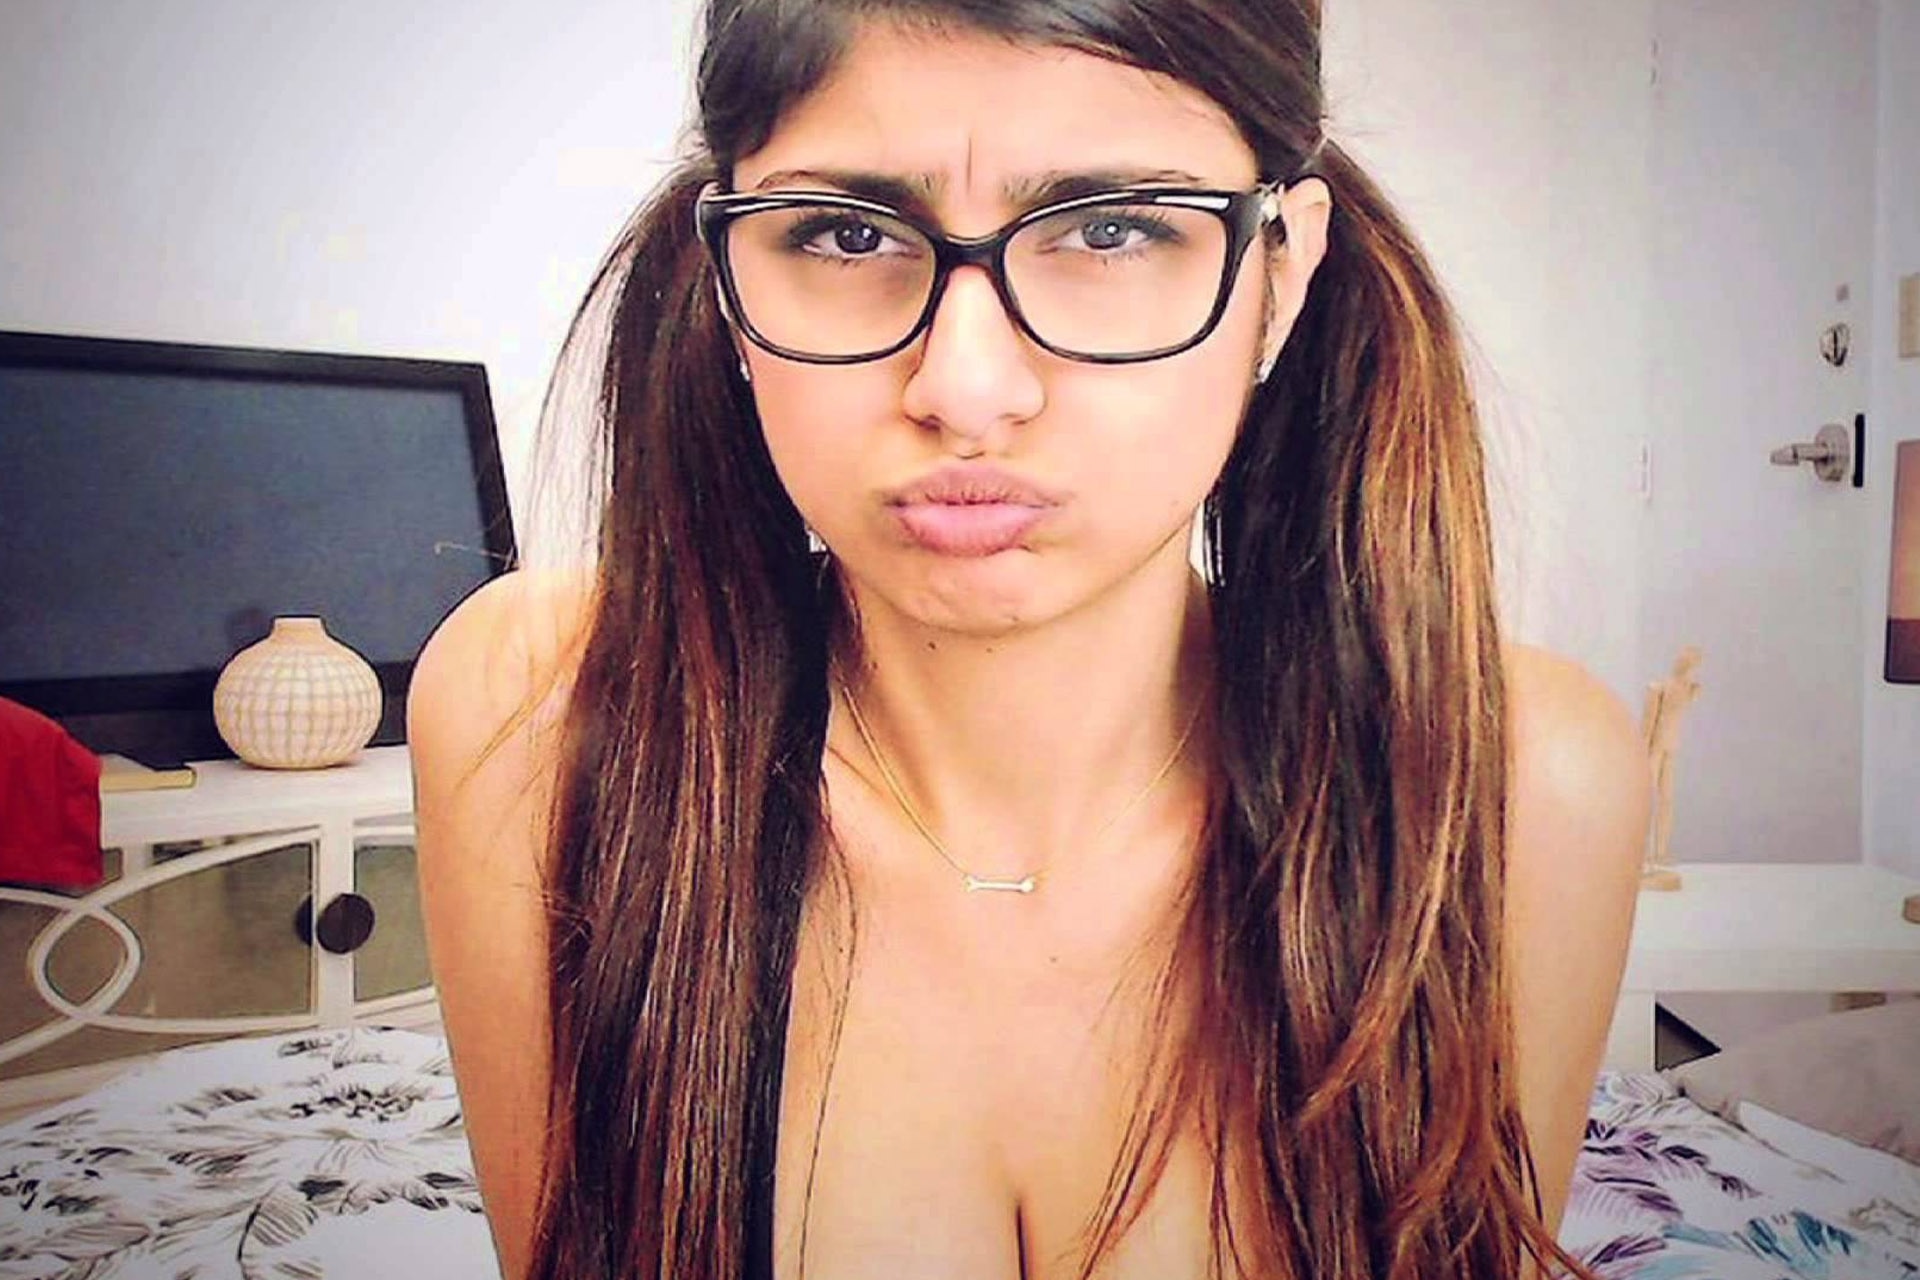 benjamin skeen recommends why did mia khalifa quit pic